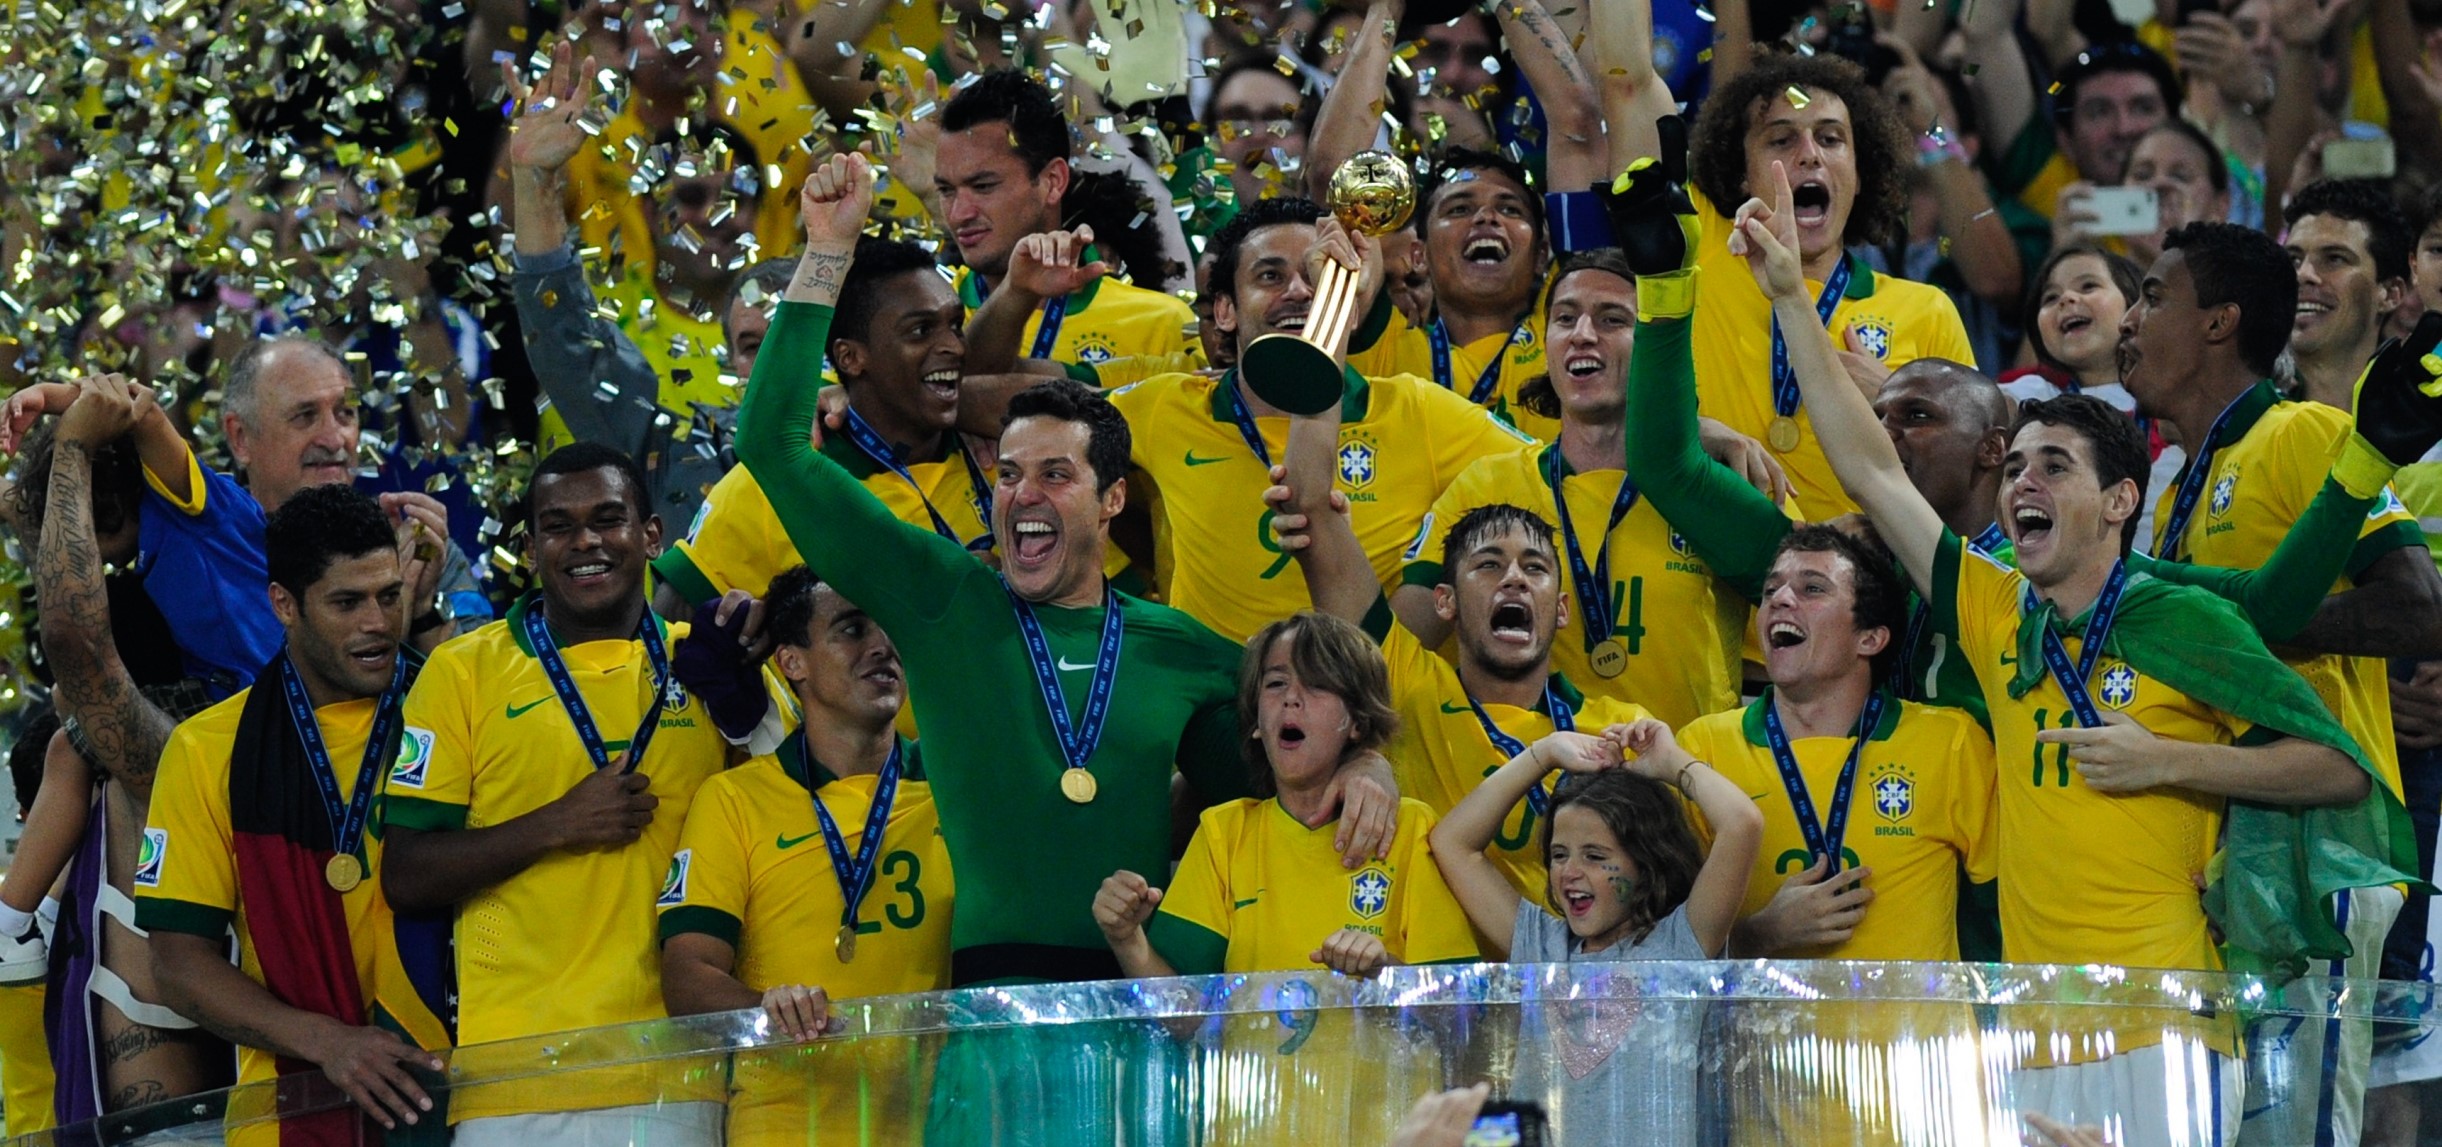 Brazil, winner of the 2013 FIFA Confederations Cup